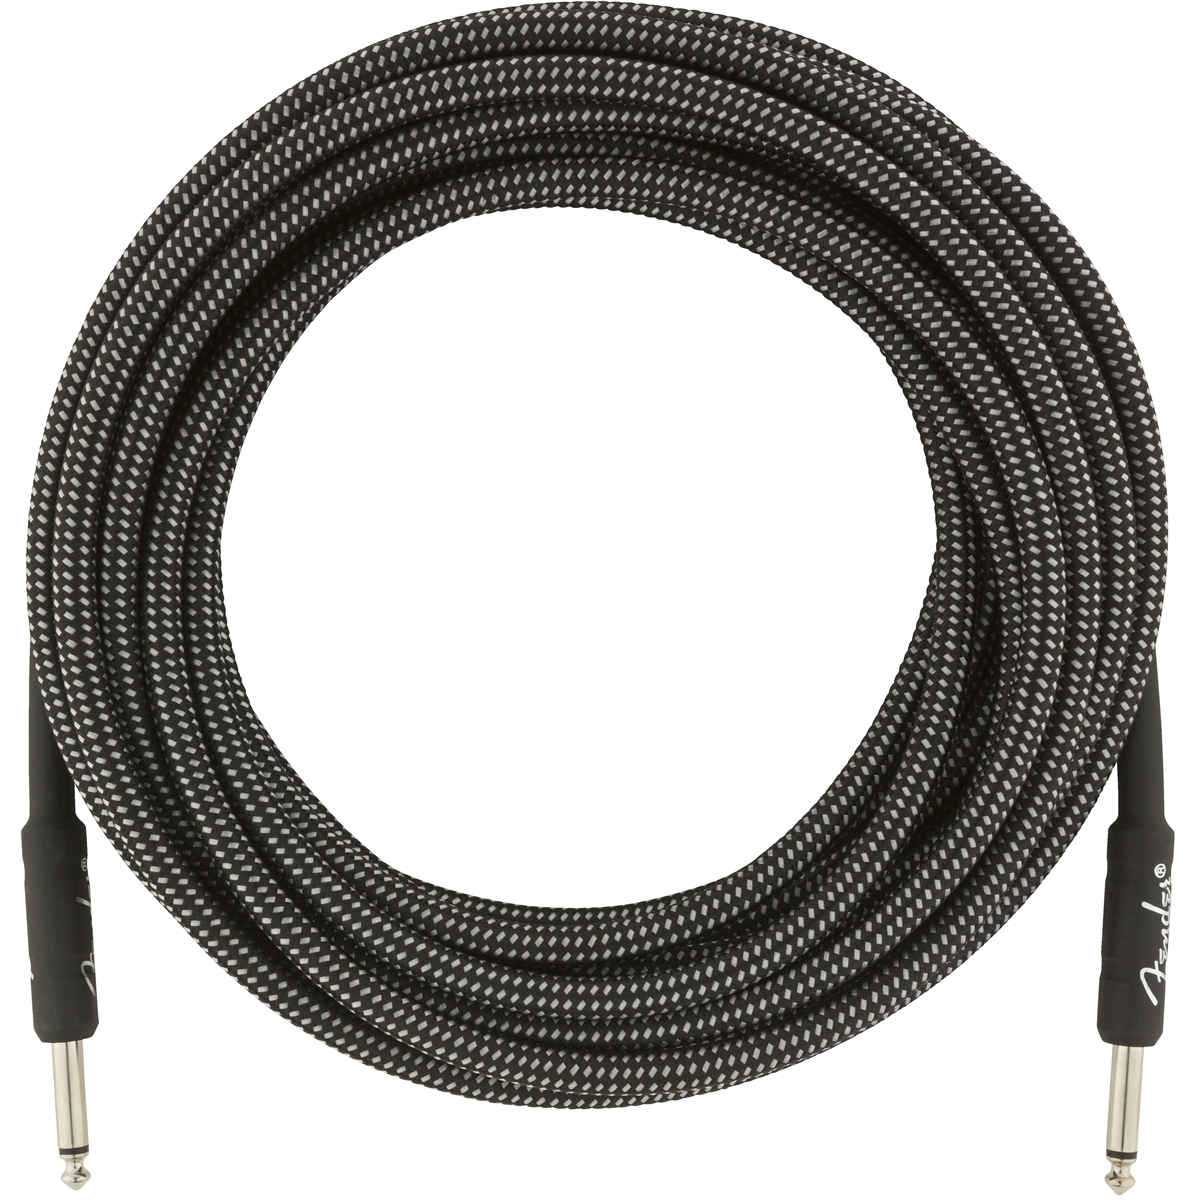 Fender Professional Series Instrument Cable 25 FT, Gray Tweed